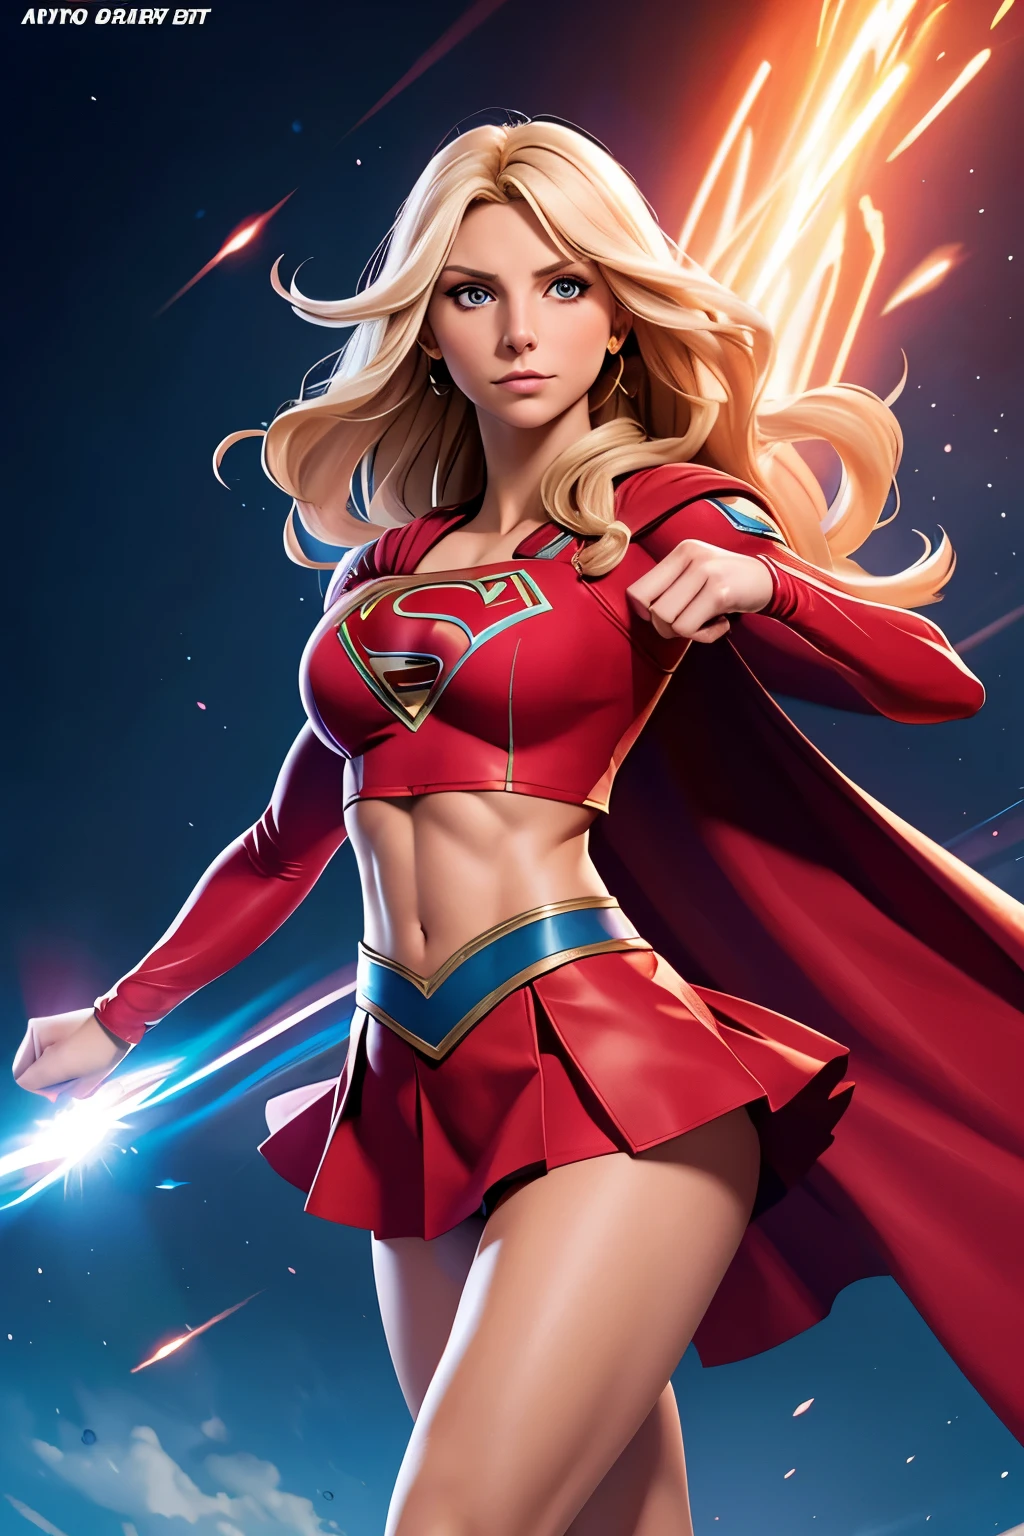 Charlotte Flair as supergirl,  extremely fit, well built, midriff exposed,  abs, short skirt, lifting off as she starts to fly, eyes glowing red, menacing,  4k, highly detailed, comic book art 